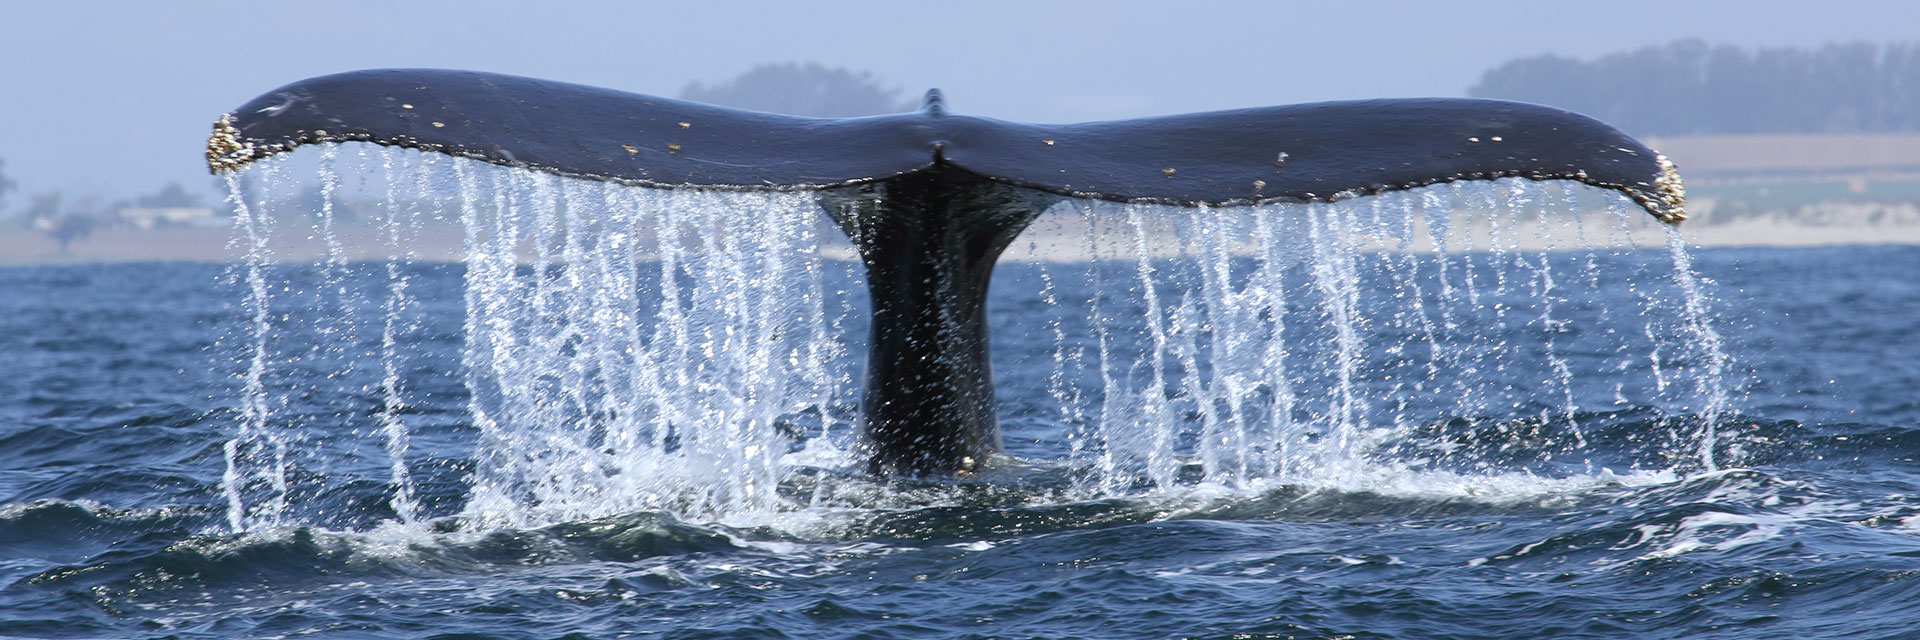 Whale Watching Package in Monterey Hotel